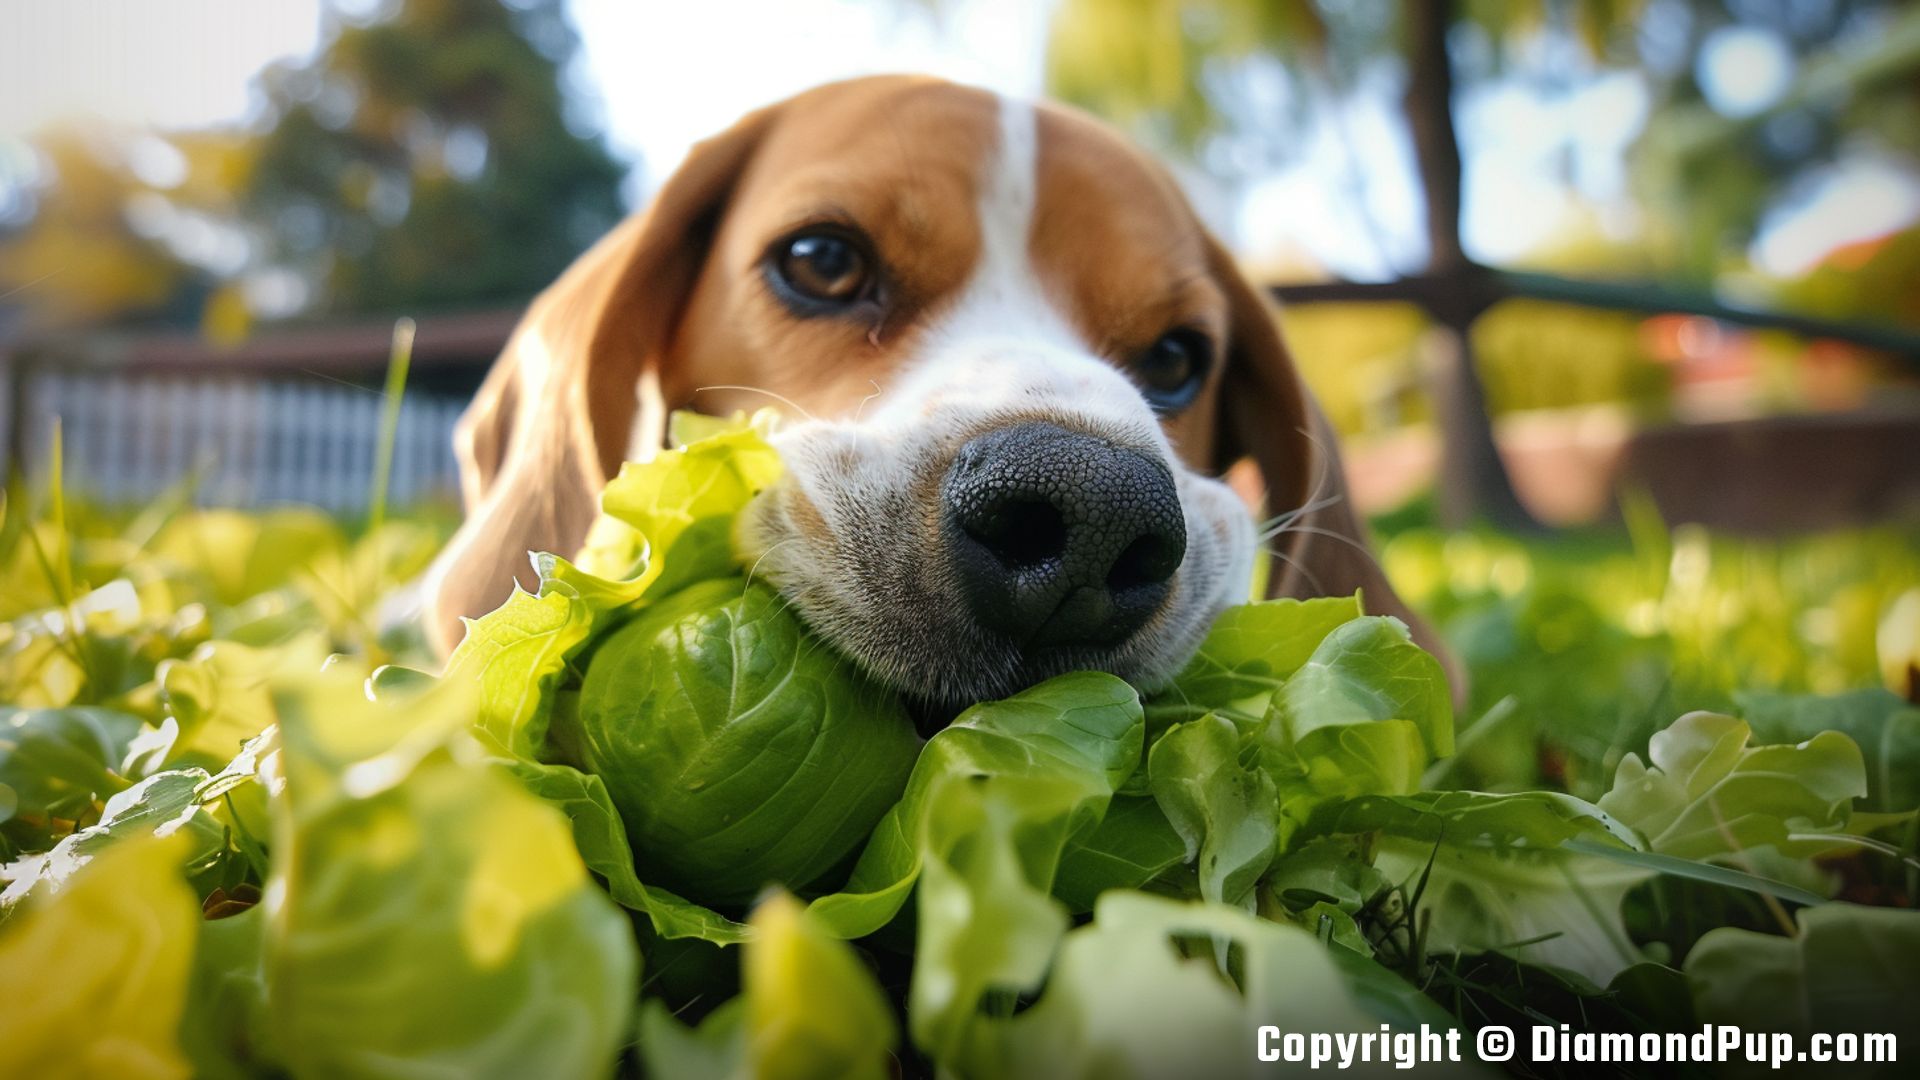 Photograph of an Adorable Beagle Snacking on Lettuce